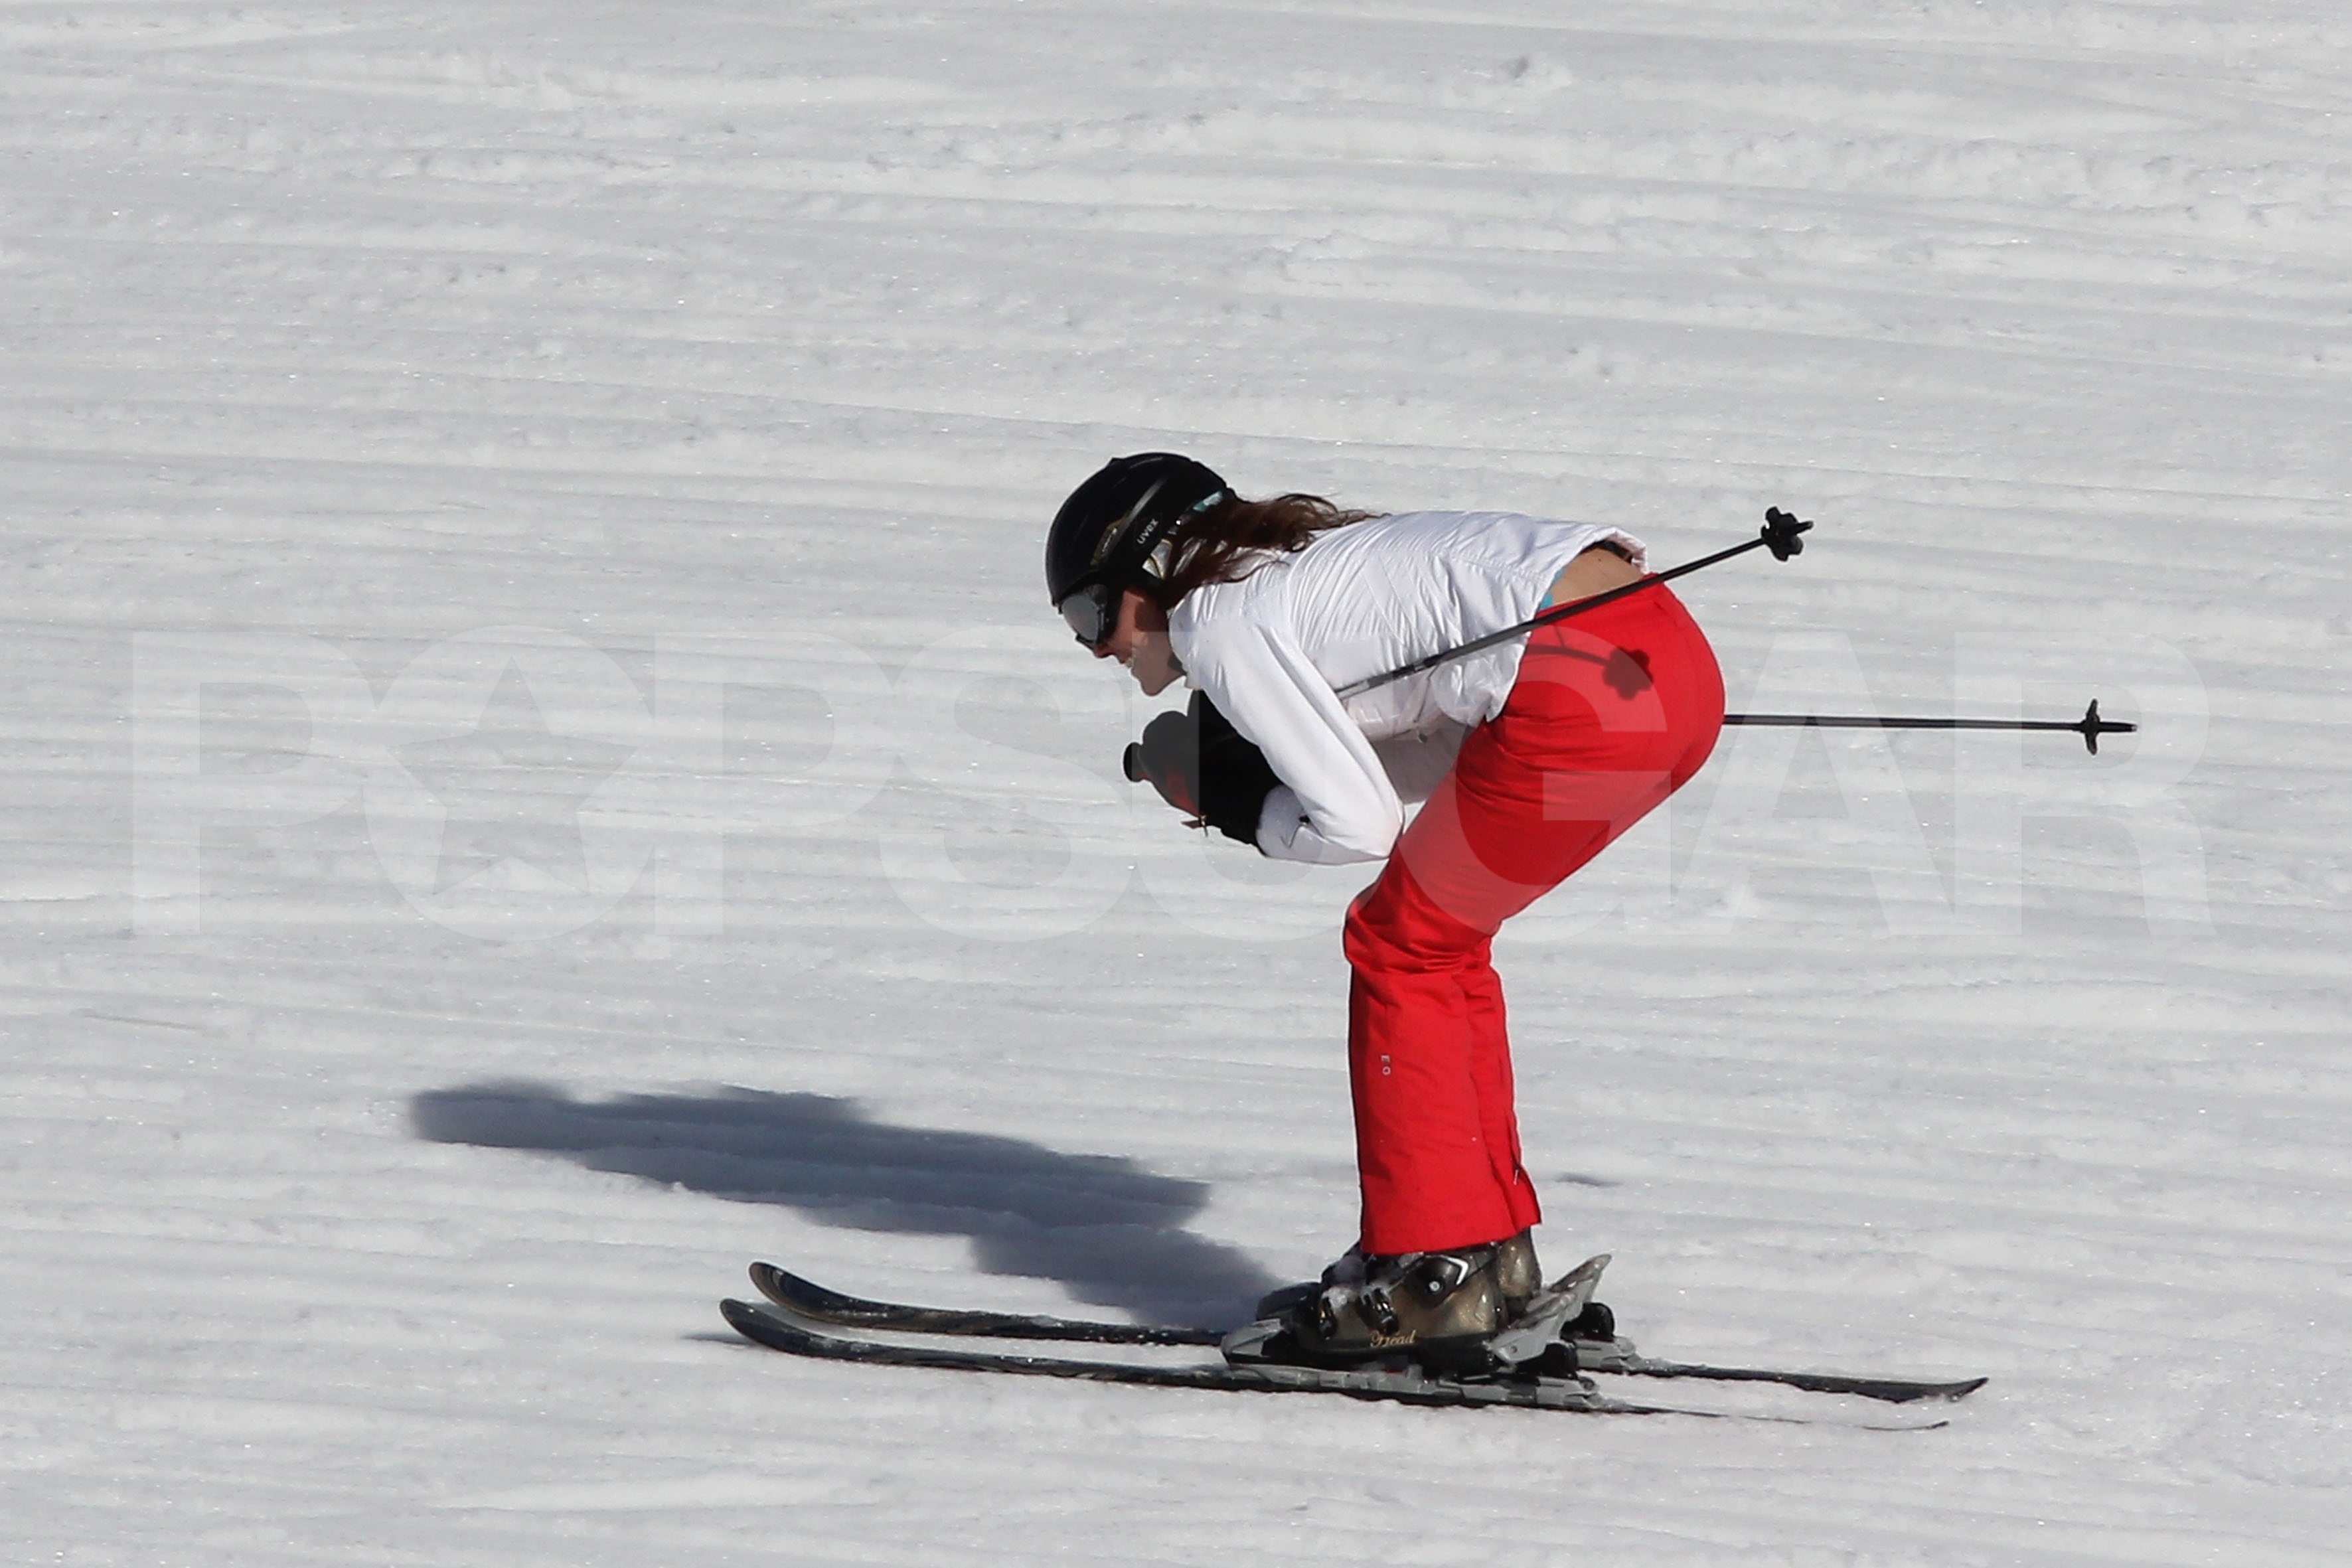 Kate-Middleton-picked-up-some-speed-while-skiing-down-mountain.jpg